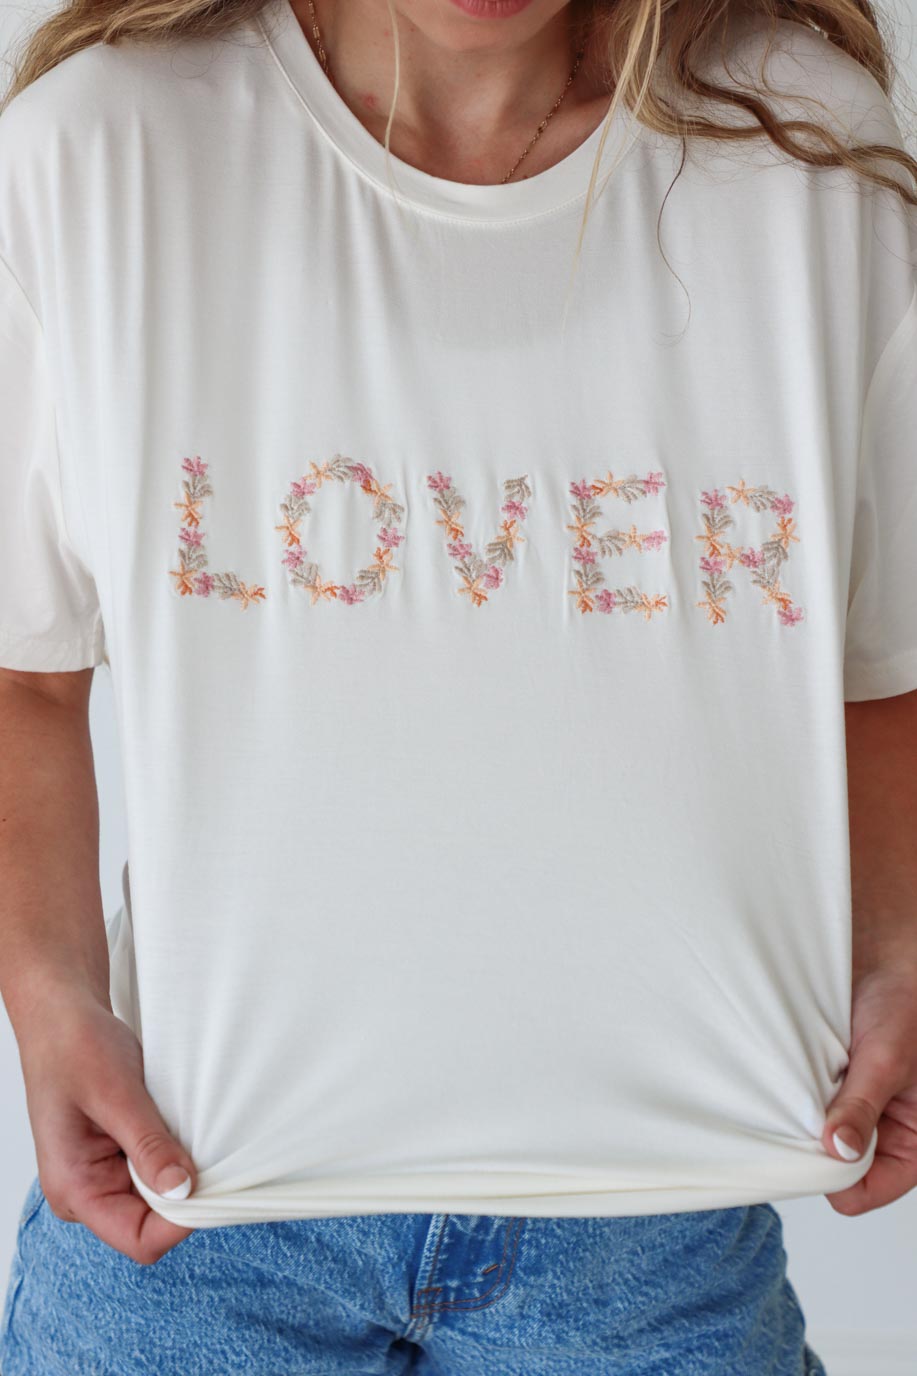 girl wearing white t-shirt with embroidered "lover" graphic